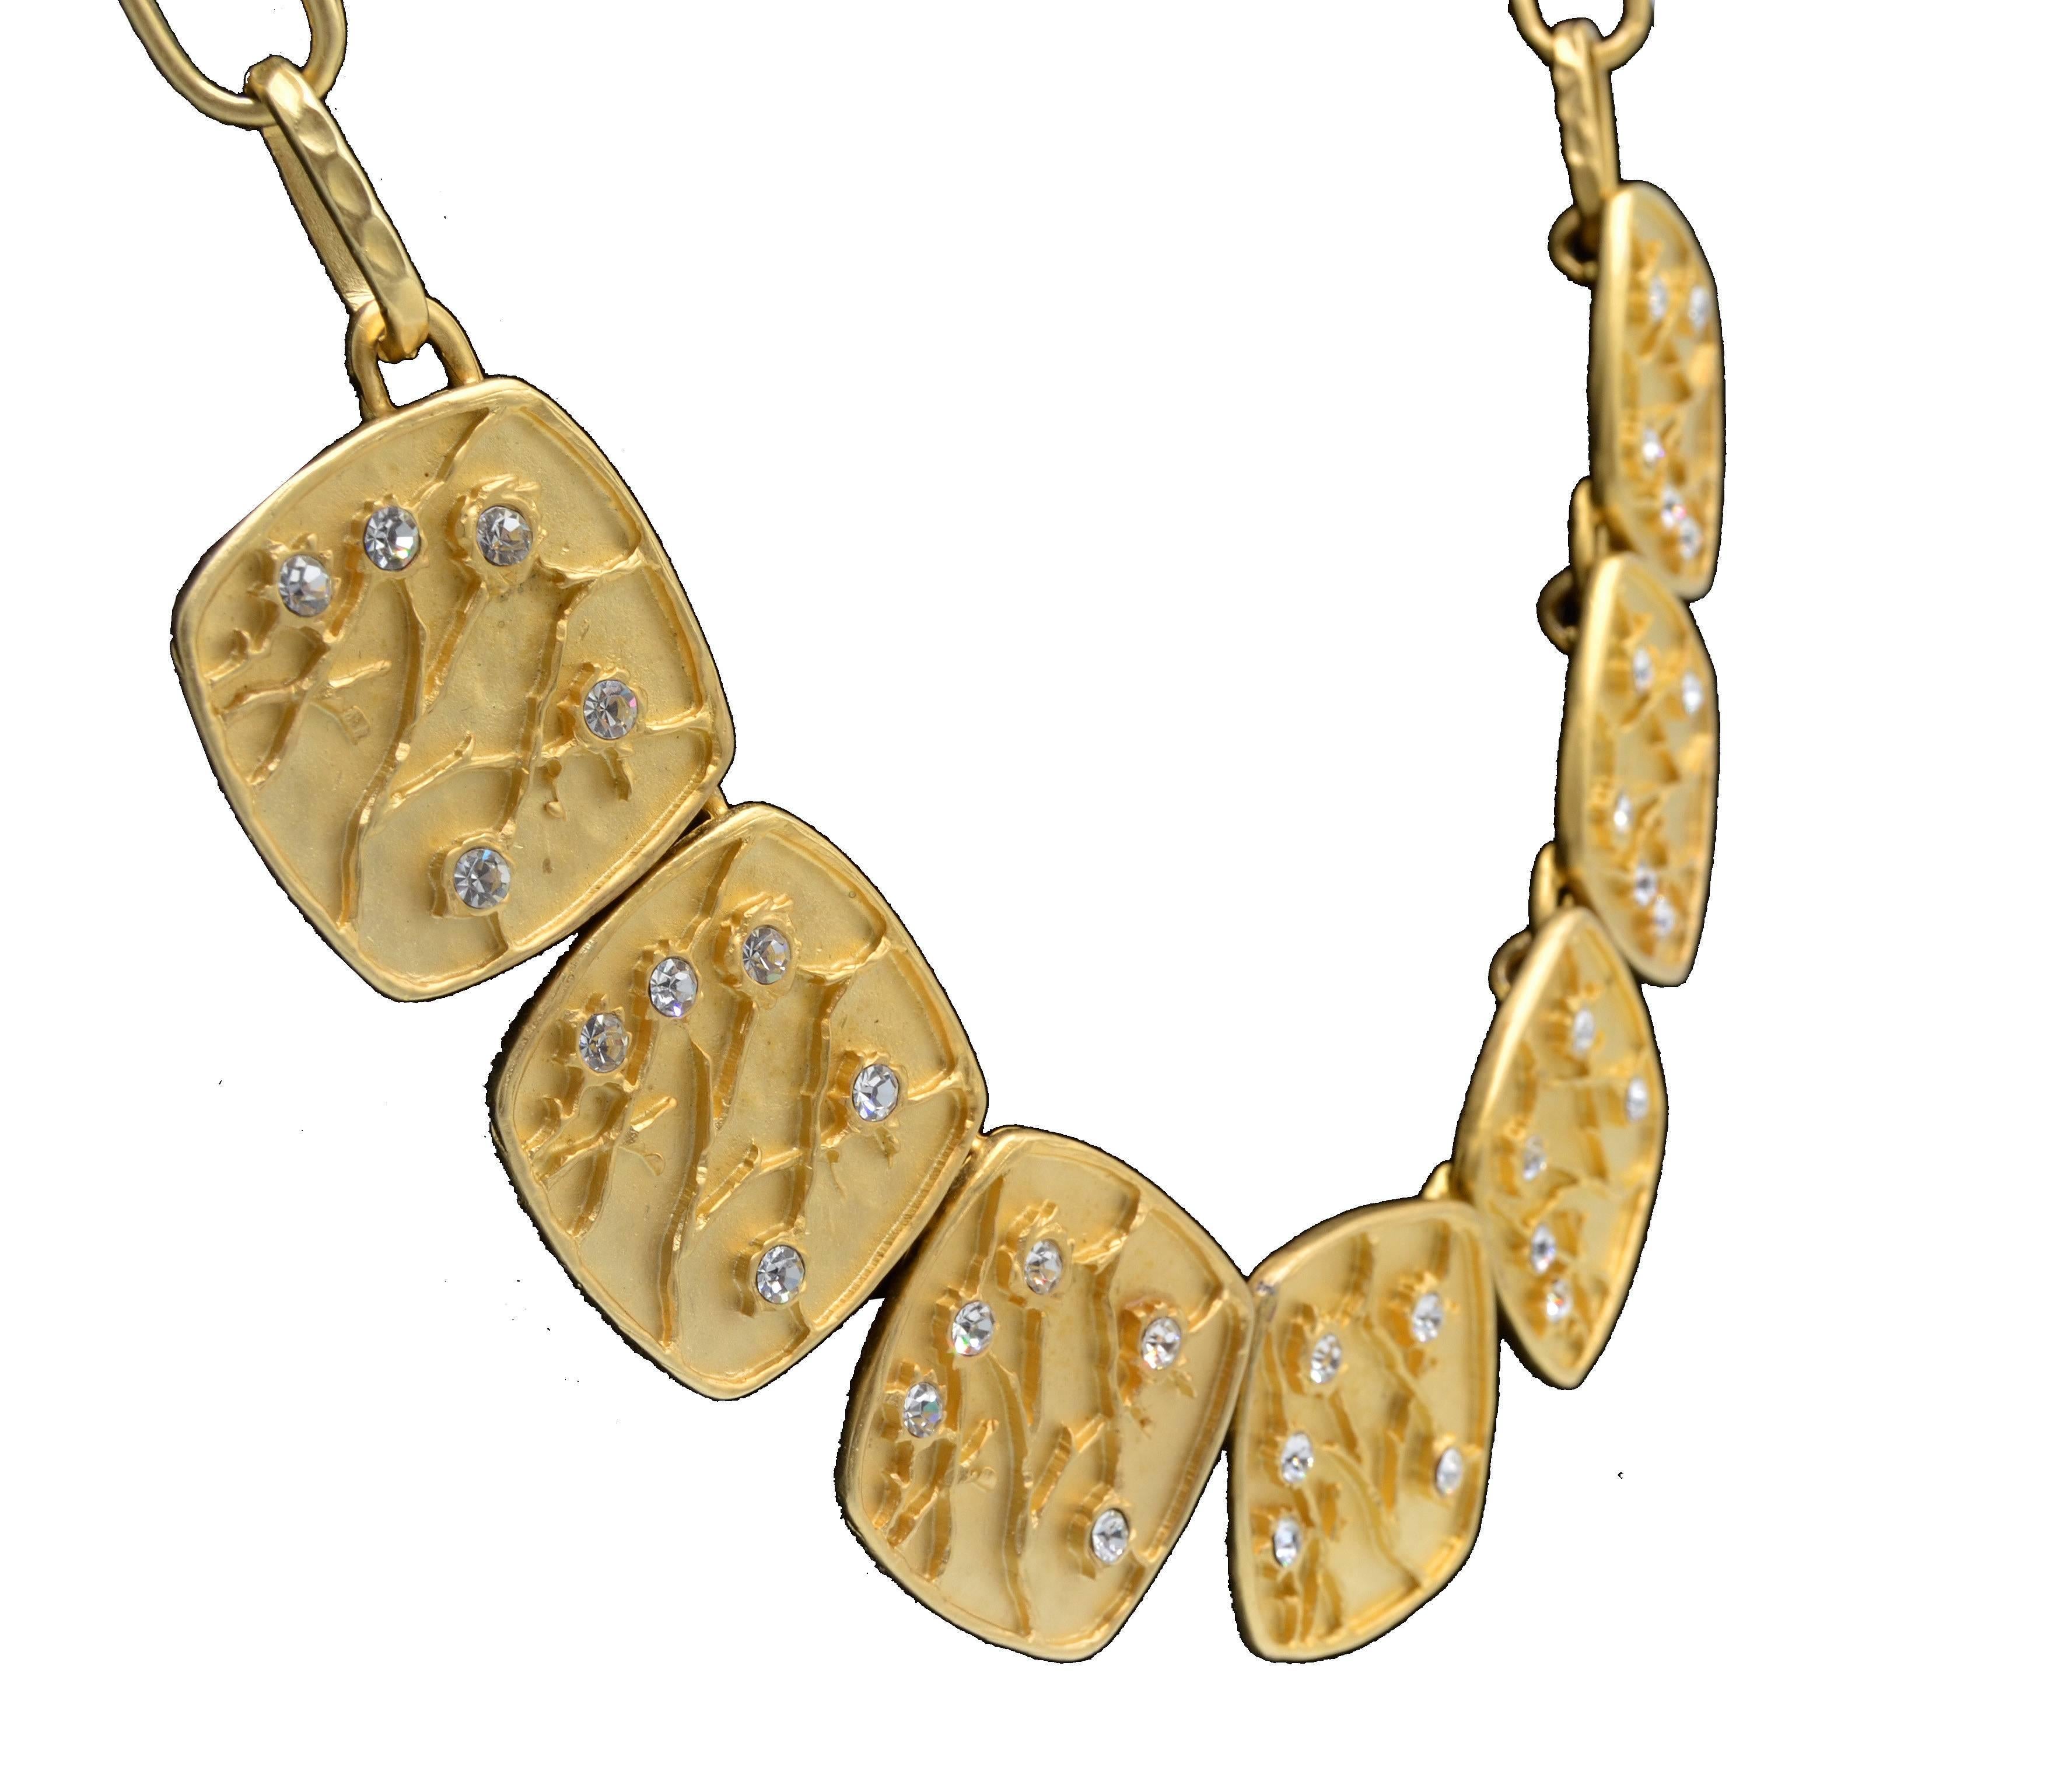 Kenneth Lane gold dipped vintage necklace with matching clip on earrings.
Marked under each ornament, Kenneth Lane, made in the USA.